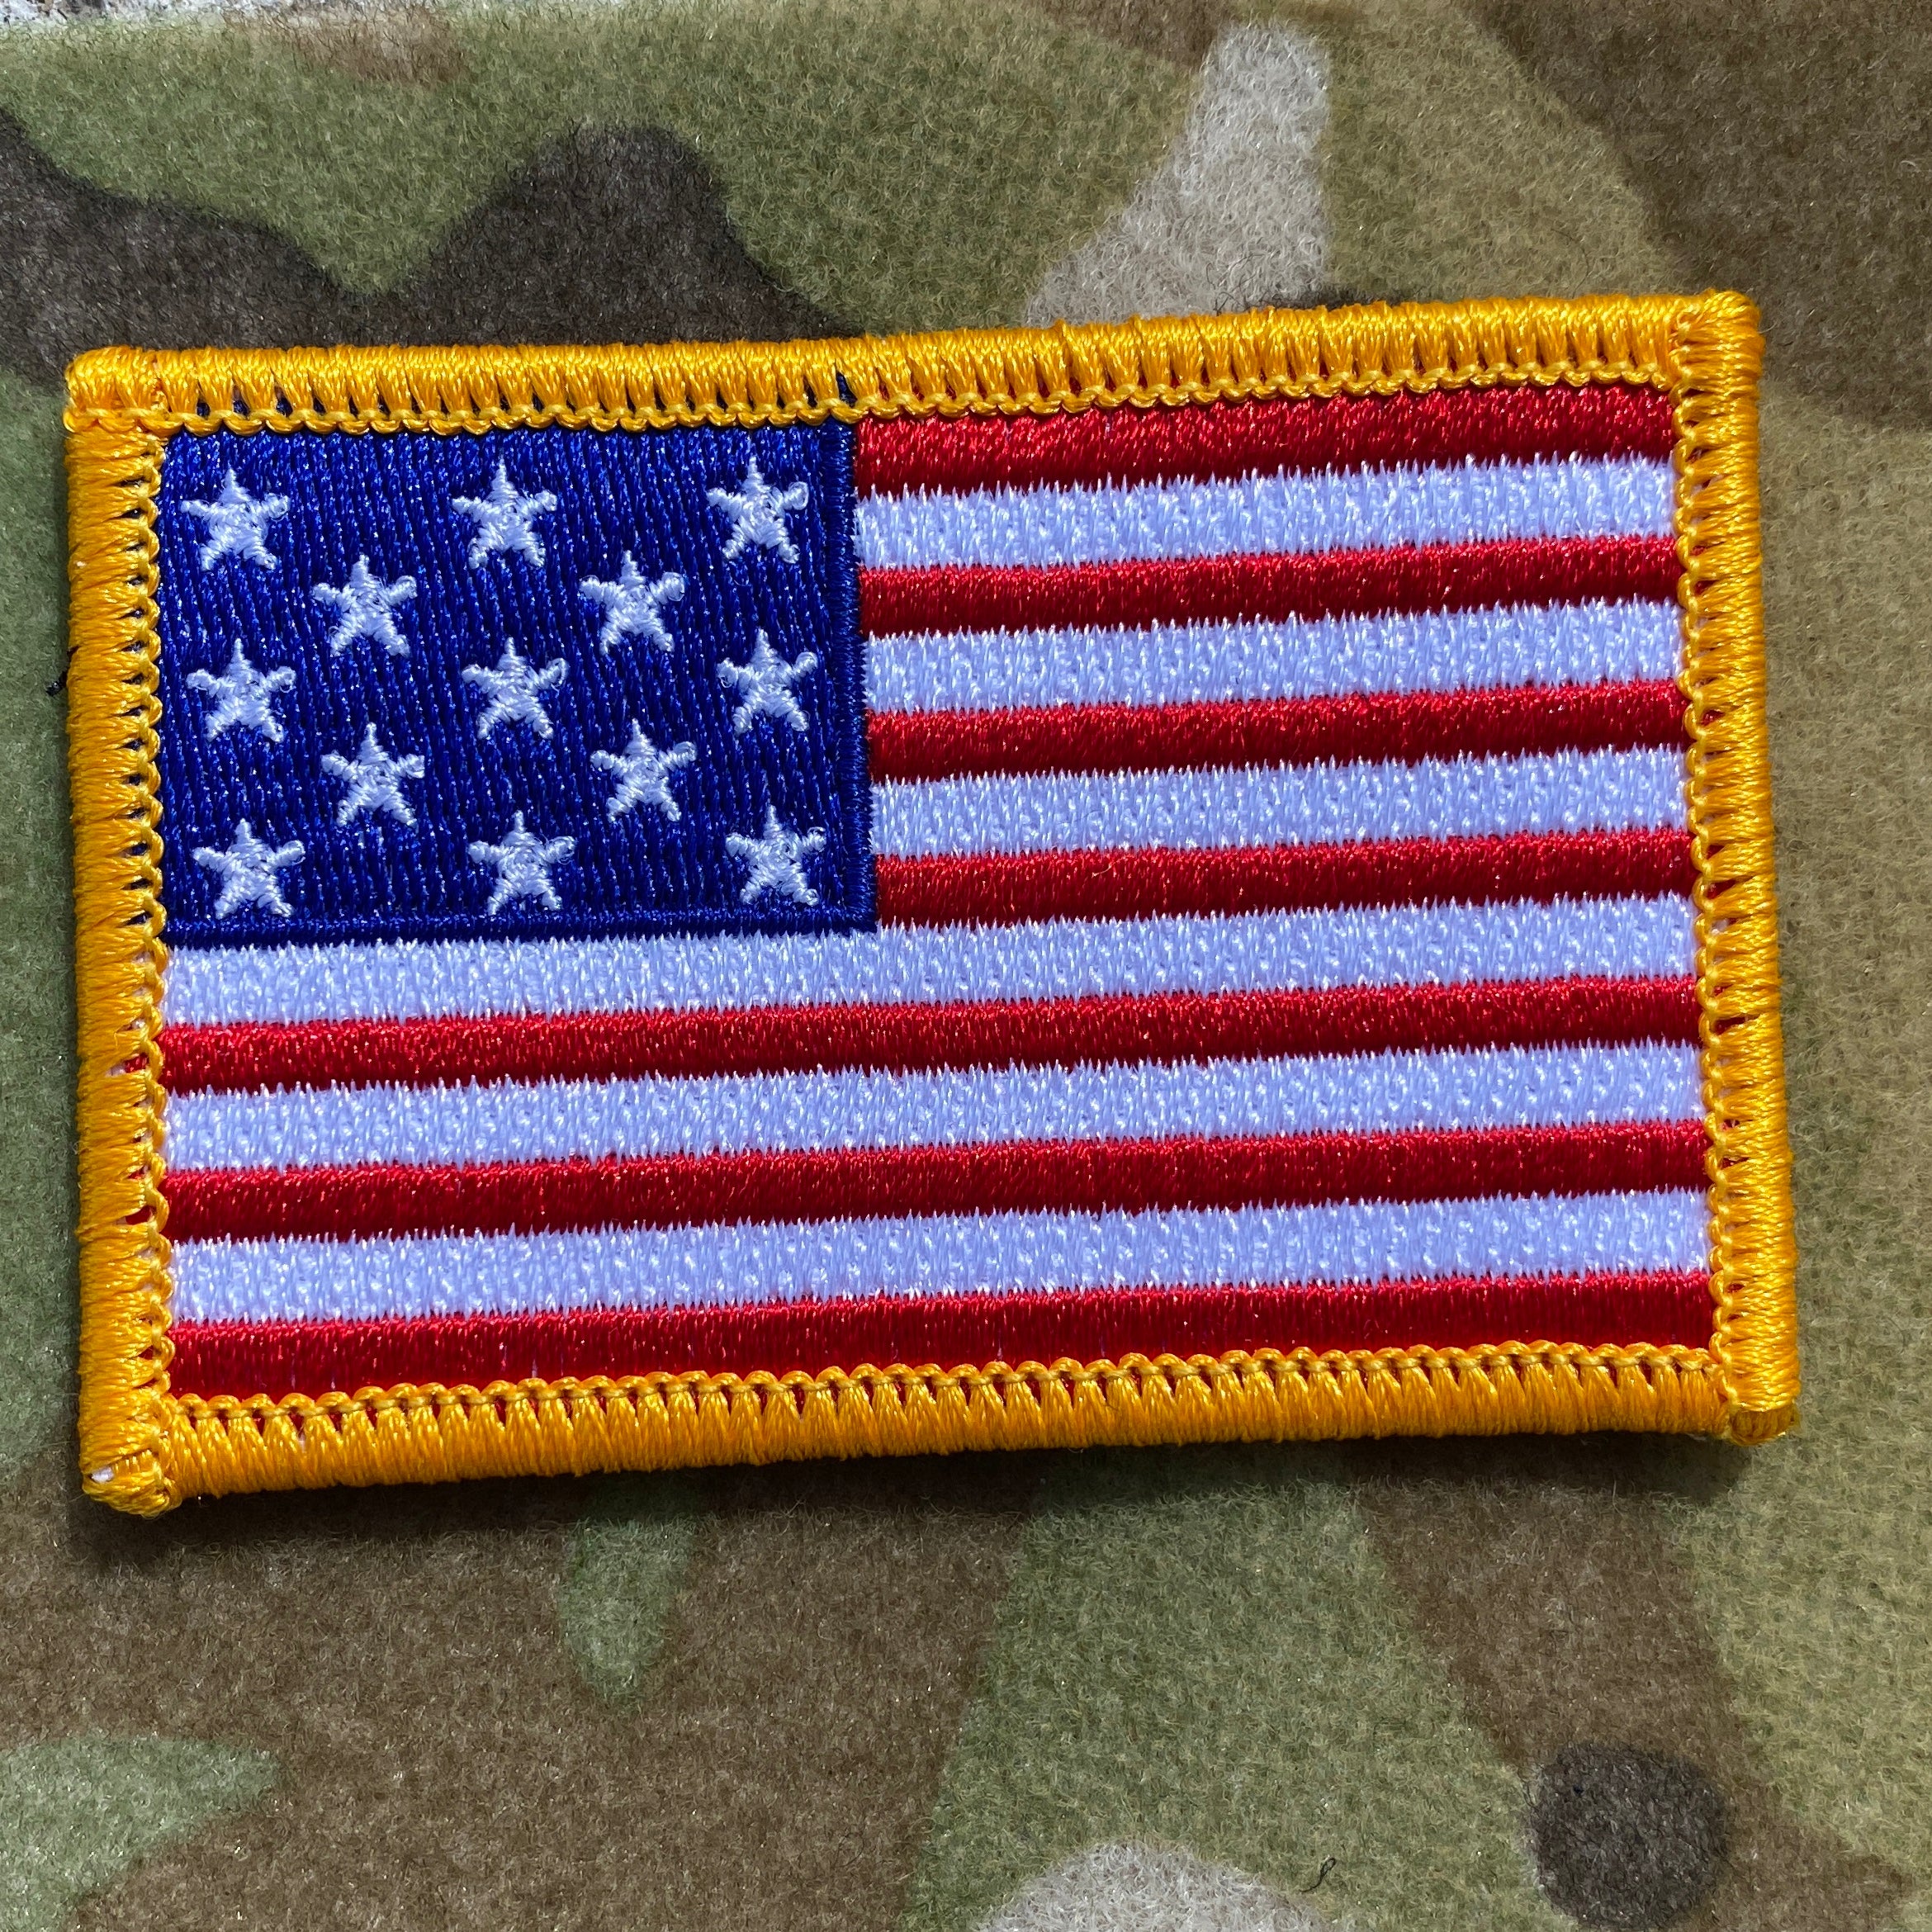 13-Star Historical US Flag Patch